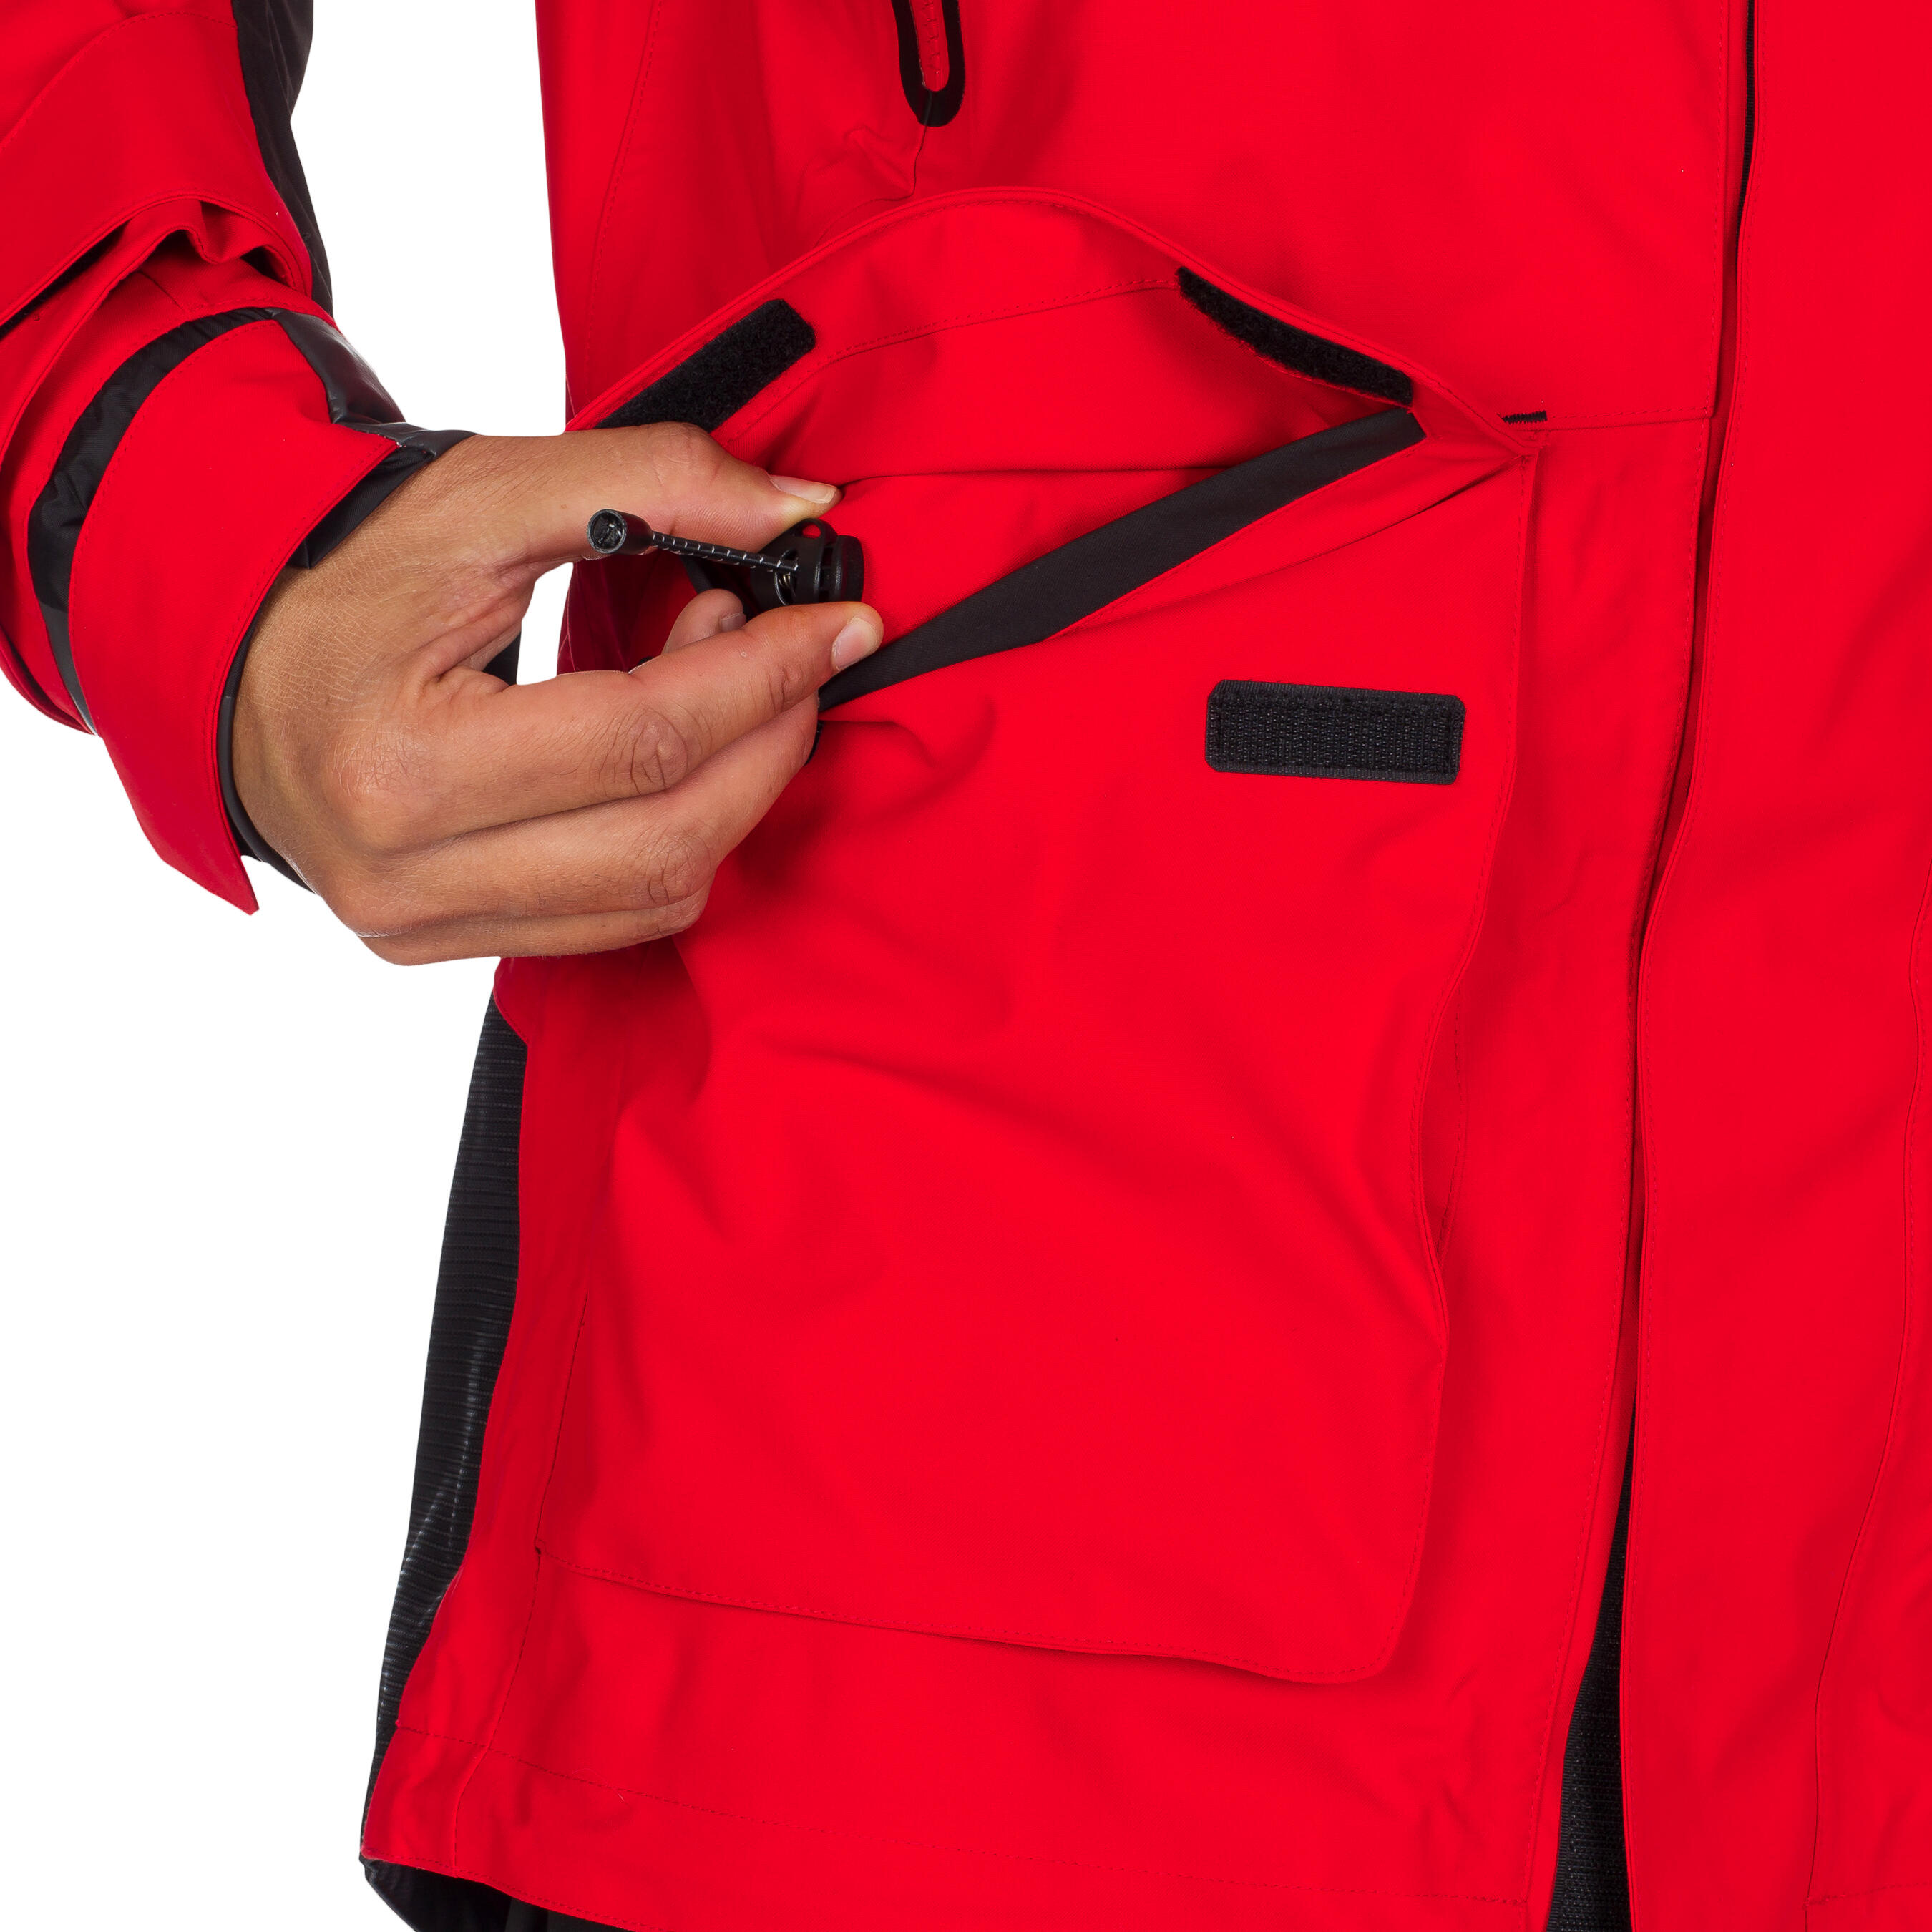 Ozean 900 Men's Waterproof and Breathable Sailing Jacket - Red 21/44